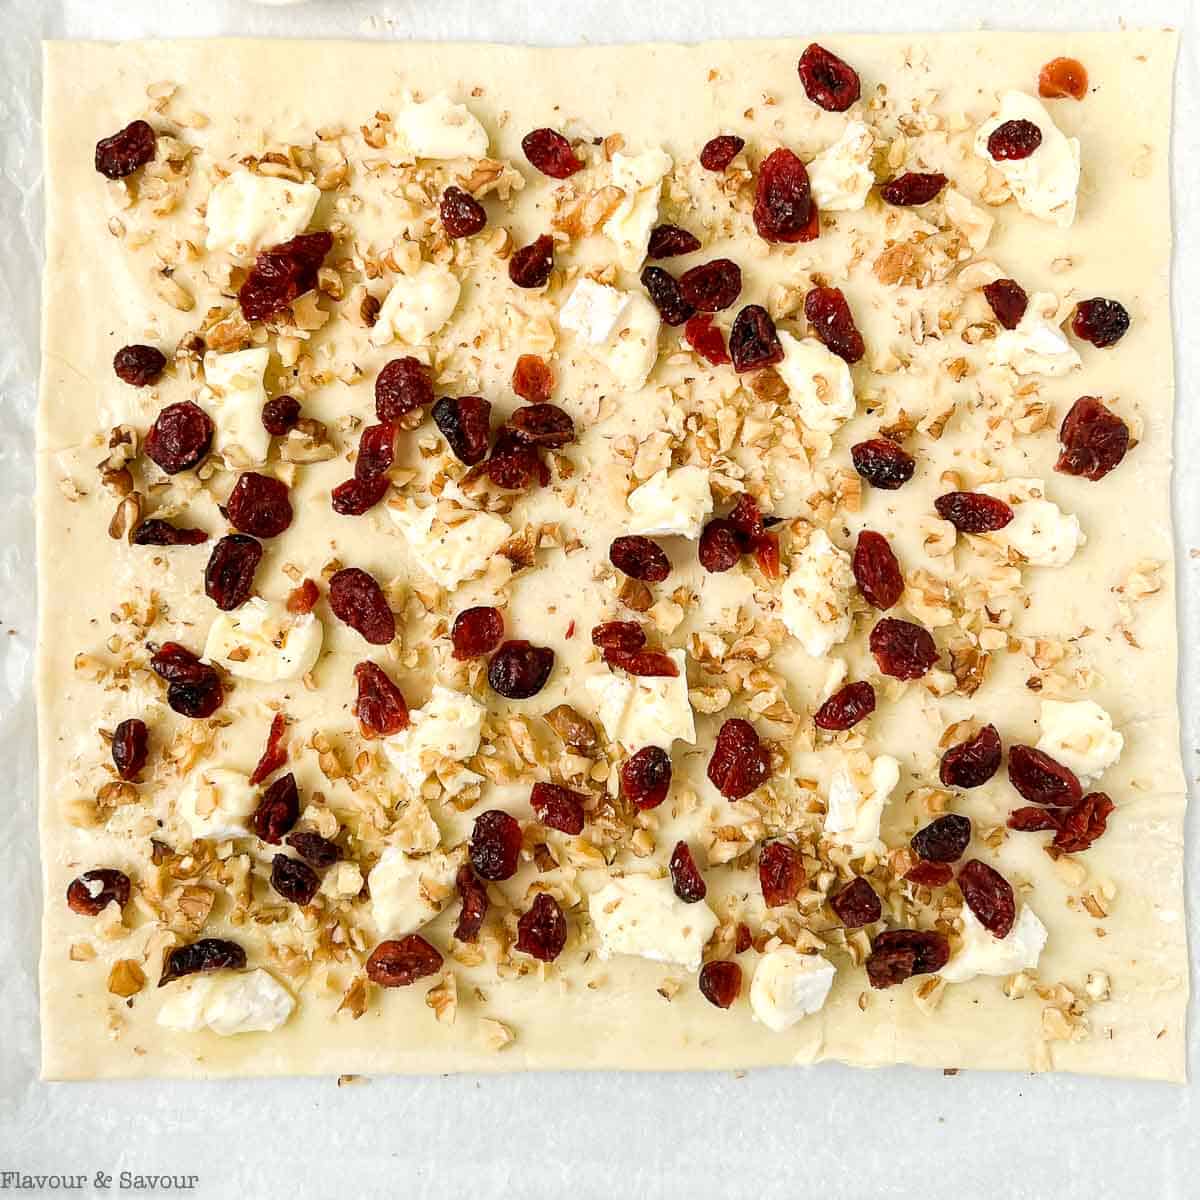 A sheet of puff pastry sprinkled with brie, cranberries and walnuts.